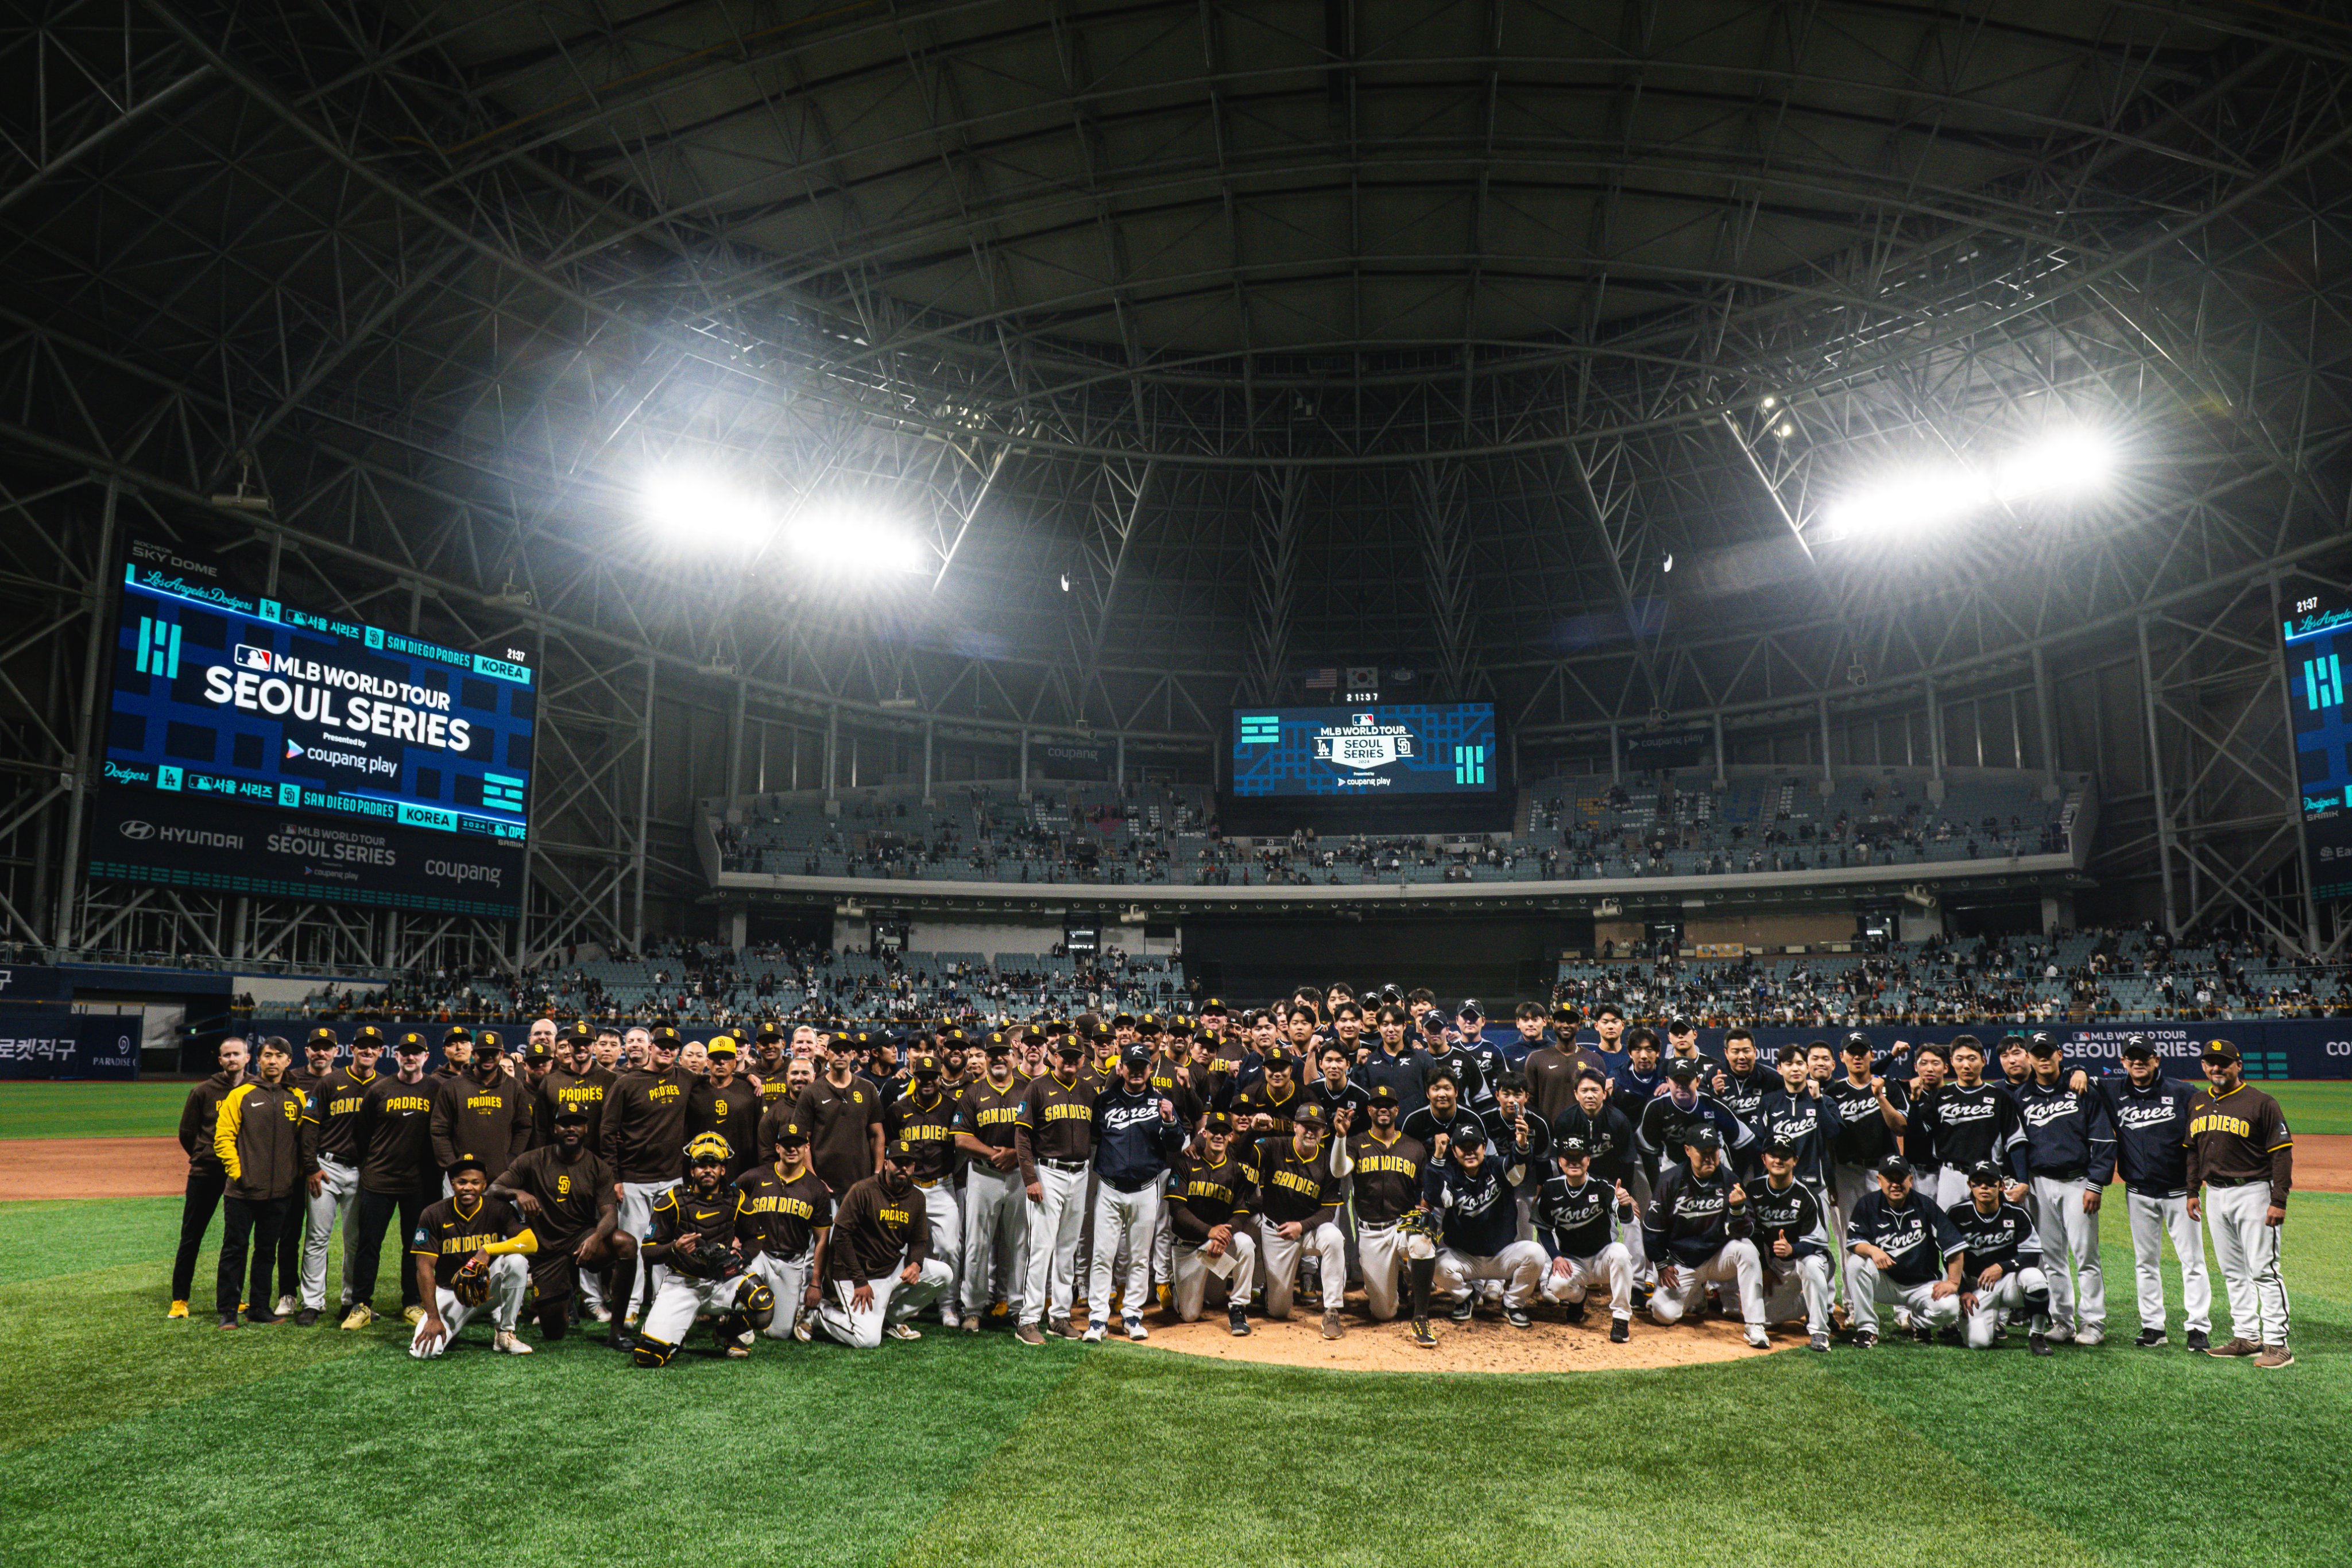 The Padres and Team Korea come together for a group photo on the mound at the Gocheok Sky Dome. On the video boards at the stadium is the MLB World Tour Seoul Series signage. 